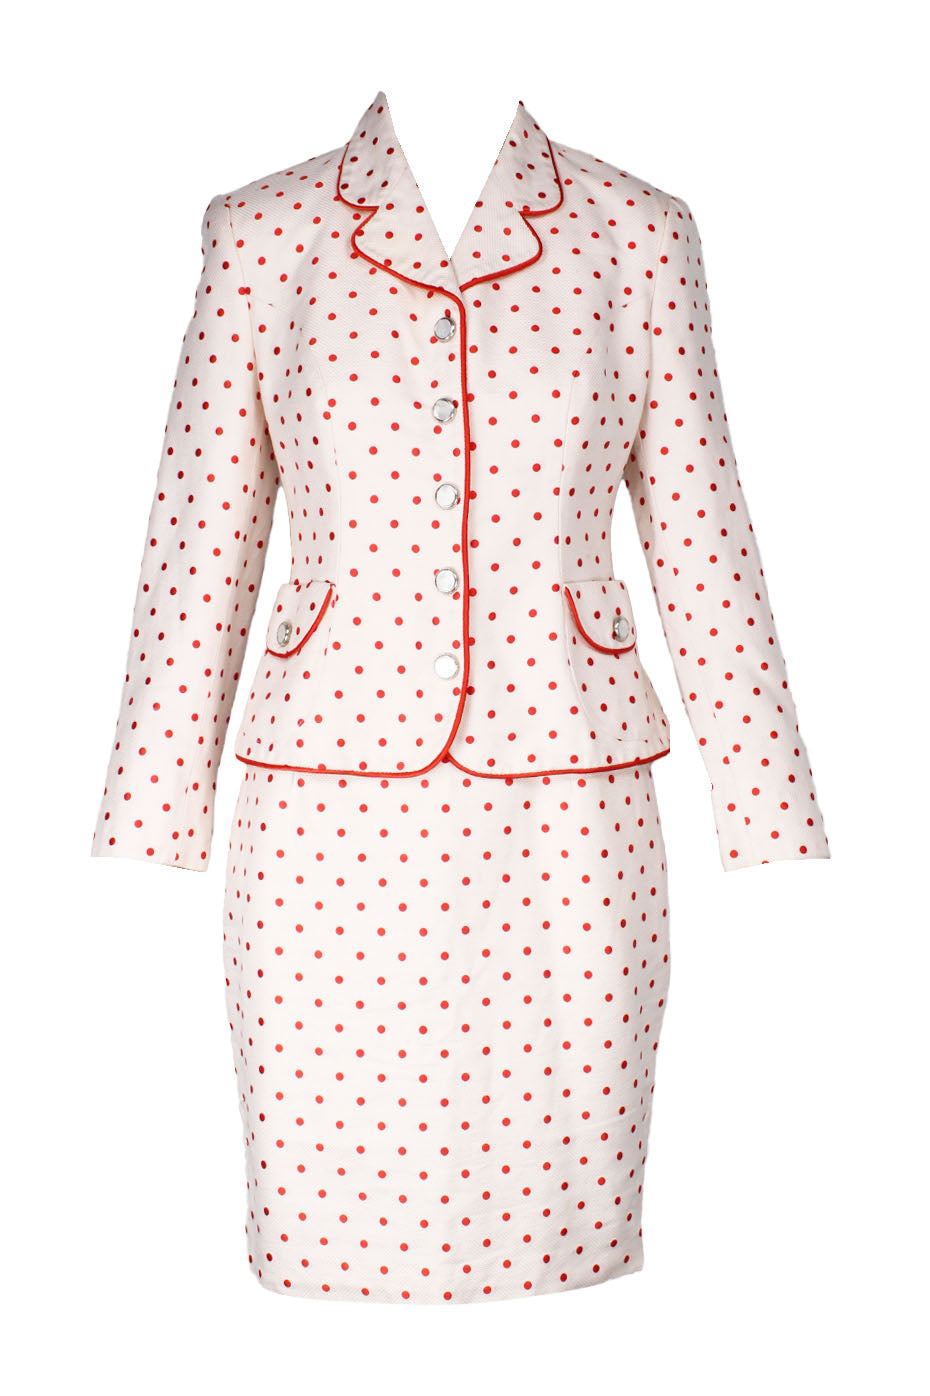 description: vintage versus by gianni versace white and red polka dot blazer and skirt set. features red hem throughout, silver-tone buttons, pressure fastener closure at center front, slit pockets at front and skirt features pencil silhouette with zipper closure at center back. 